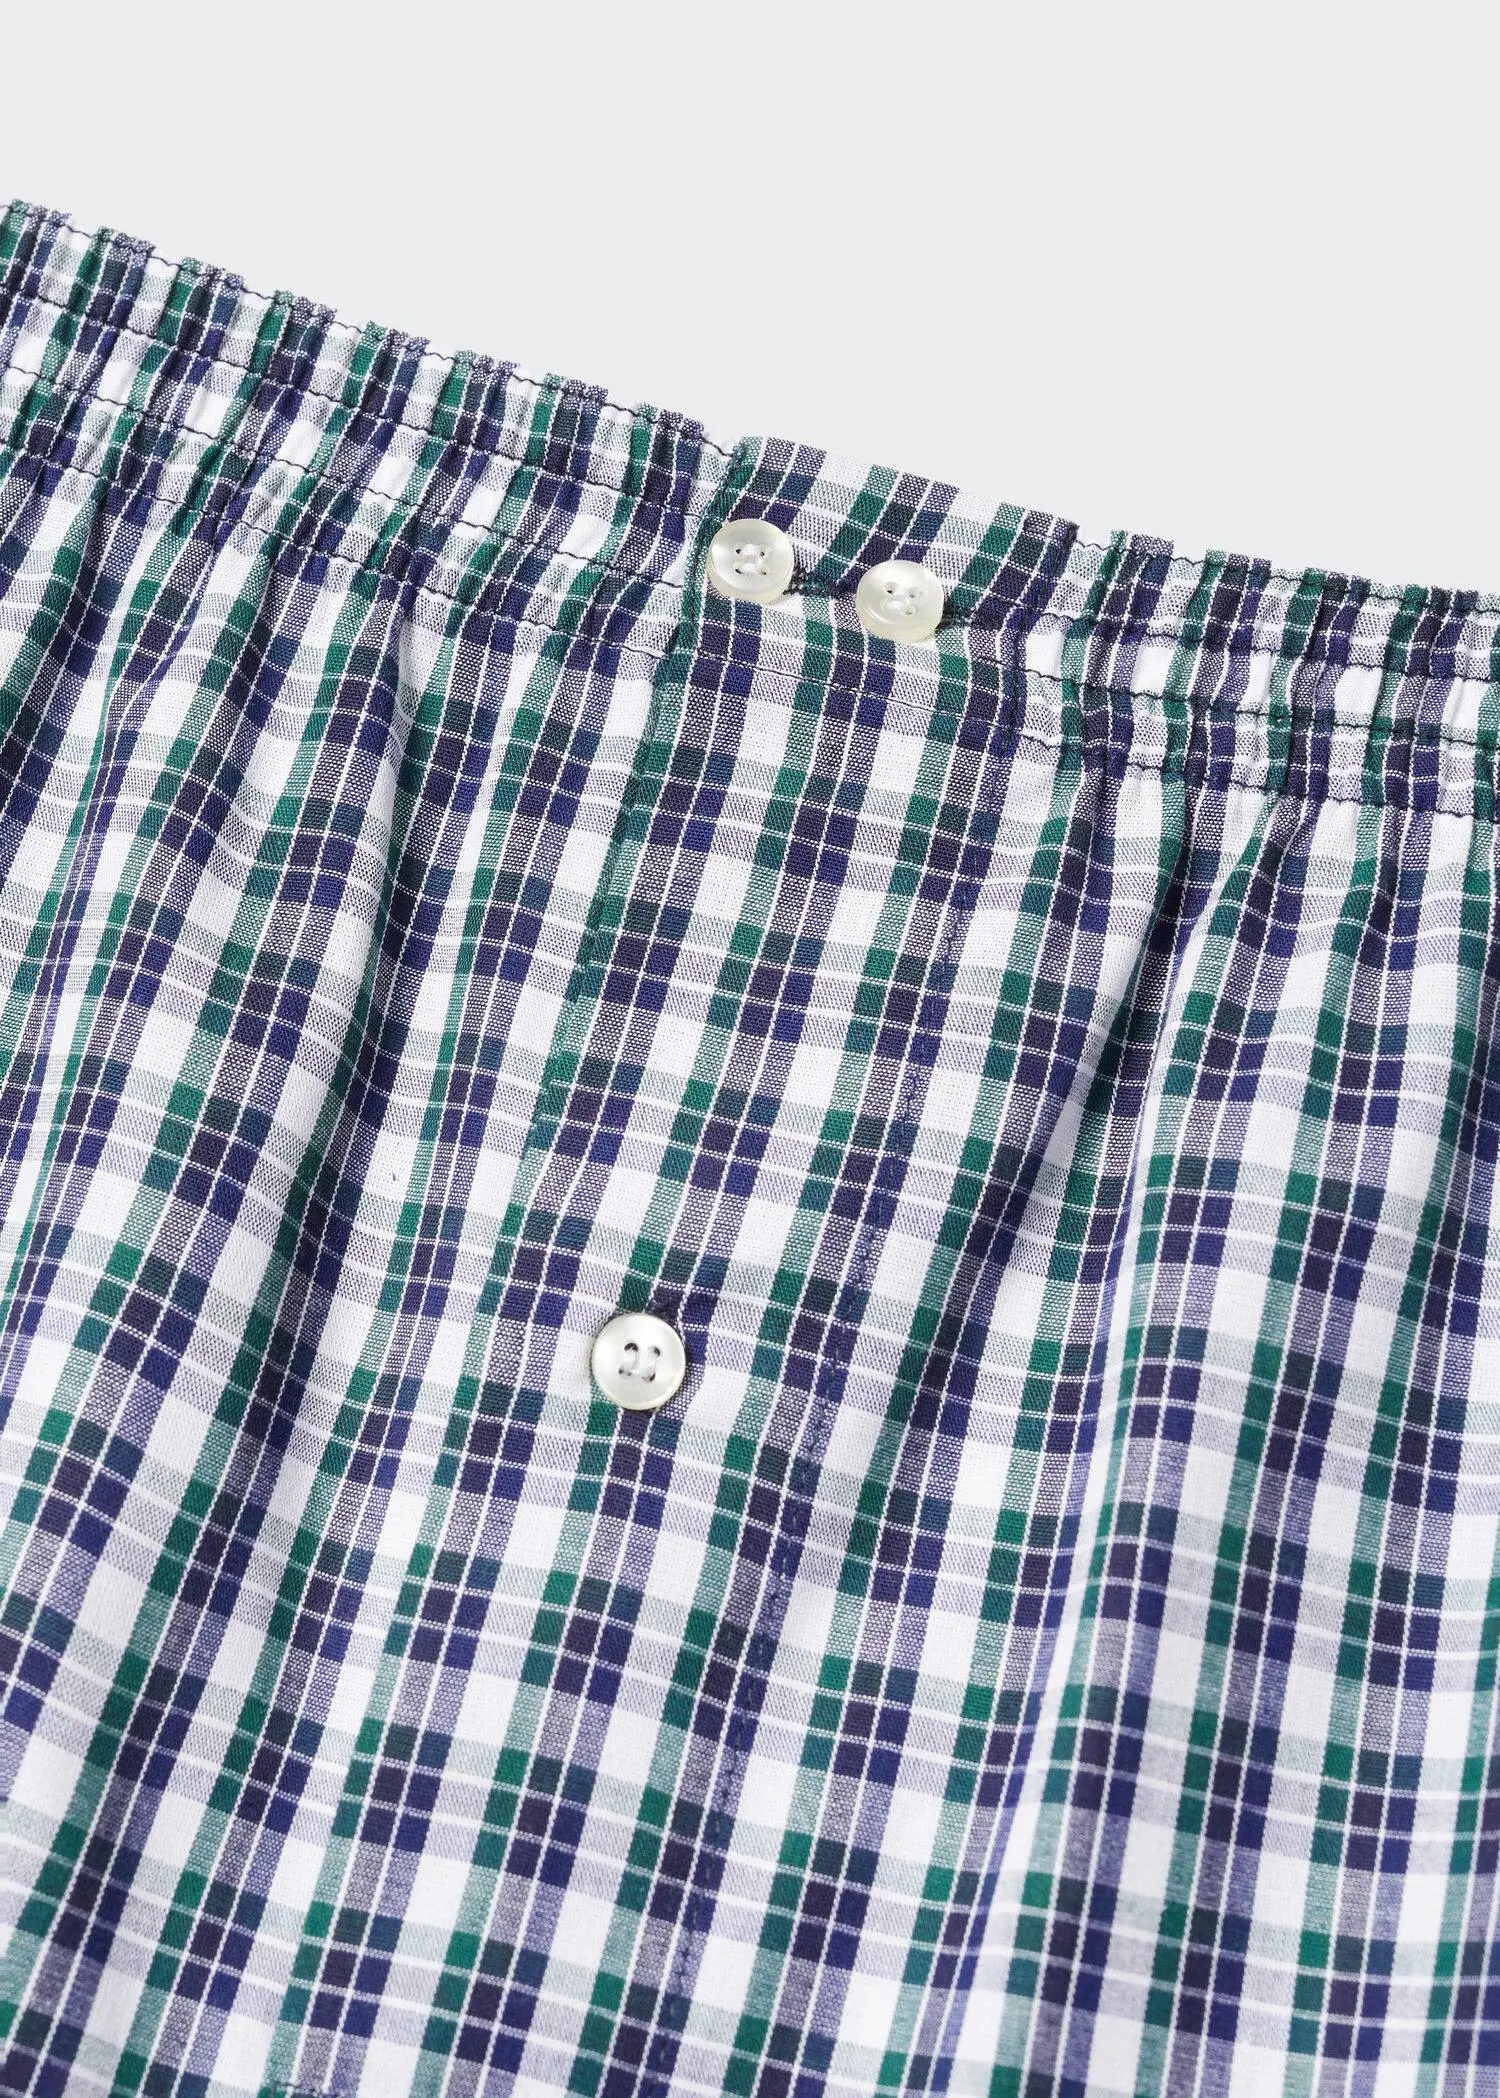 Mango Gingham check cotton briefs. a close-up view of the buttons on a pair of boxers. 